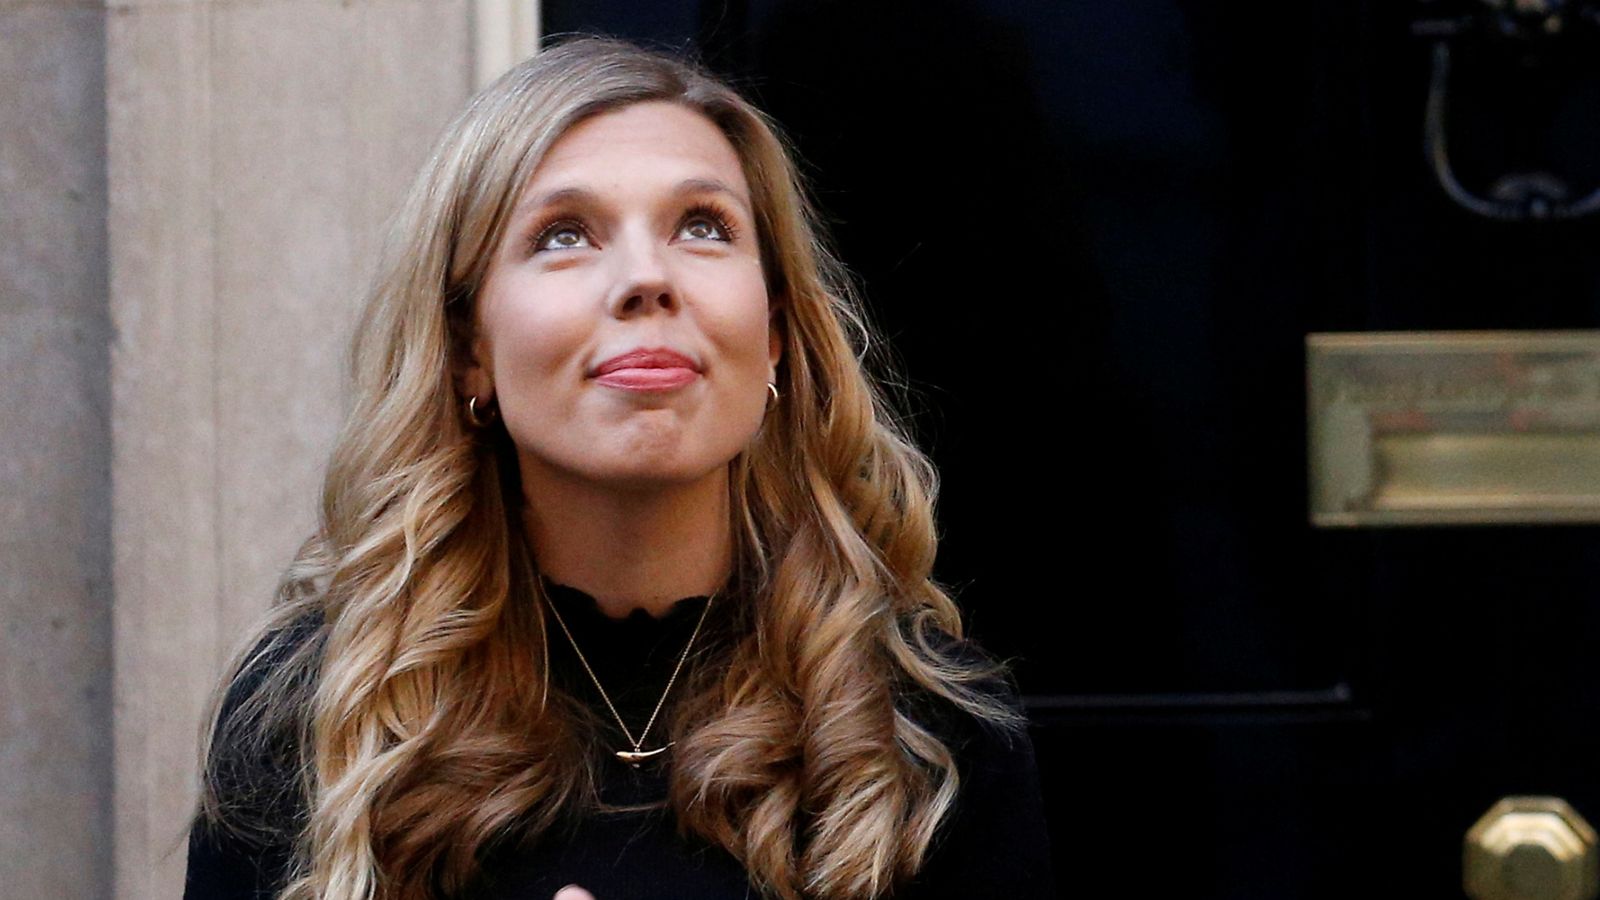 Who Is Carrie Symonds? Boris Johnson's New Wife Whose Influence Inside Number 10 Is Under Scrutiny